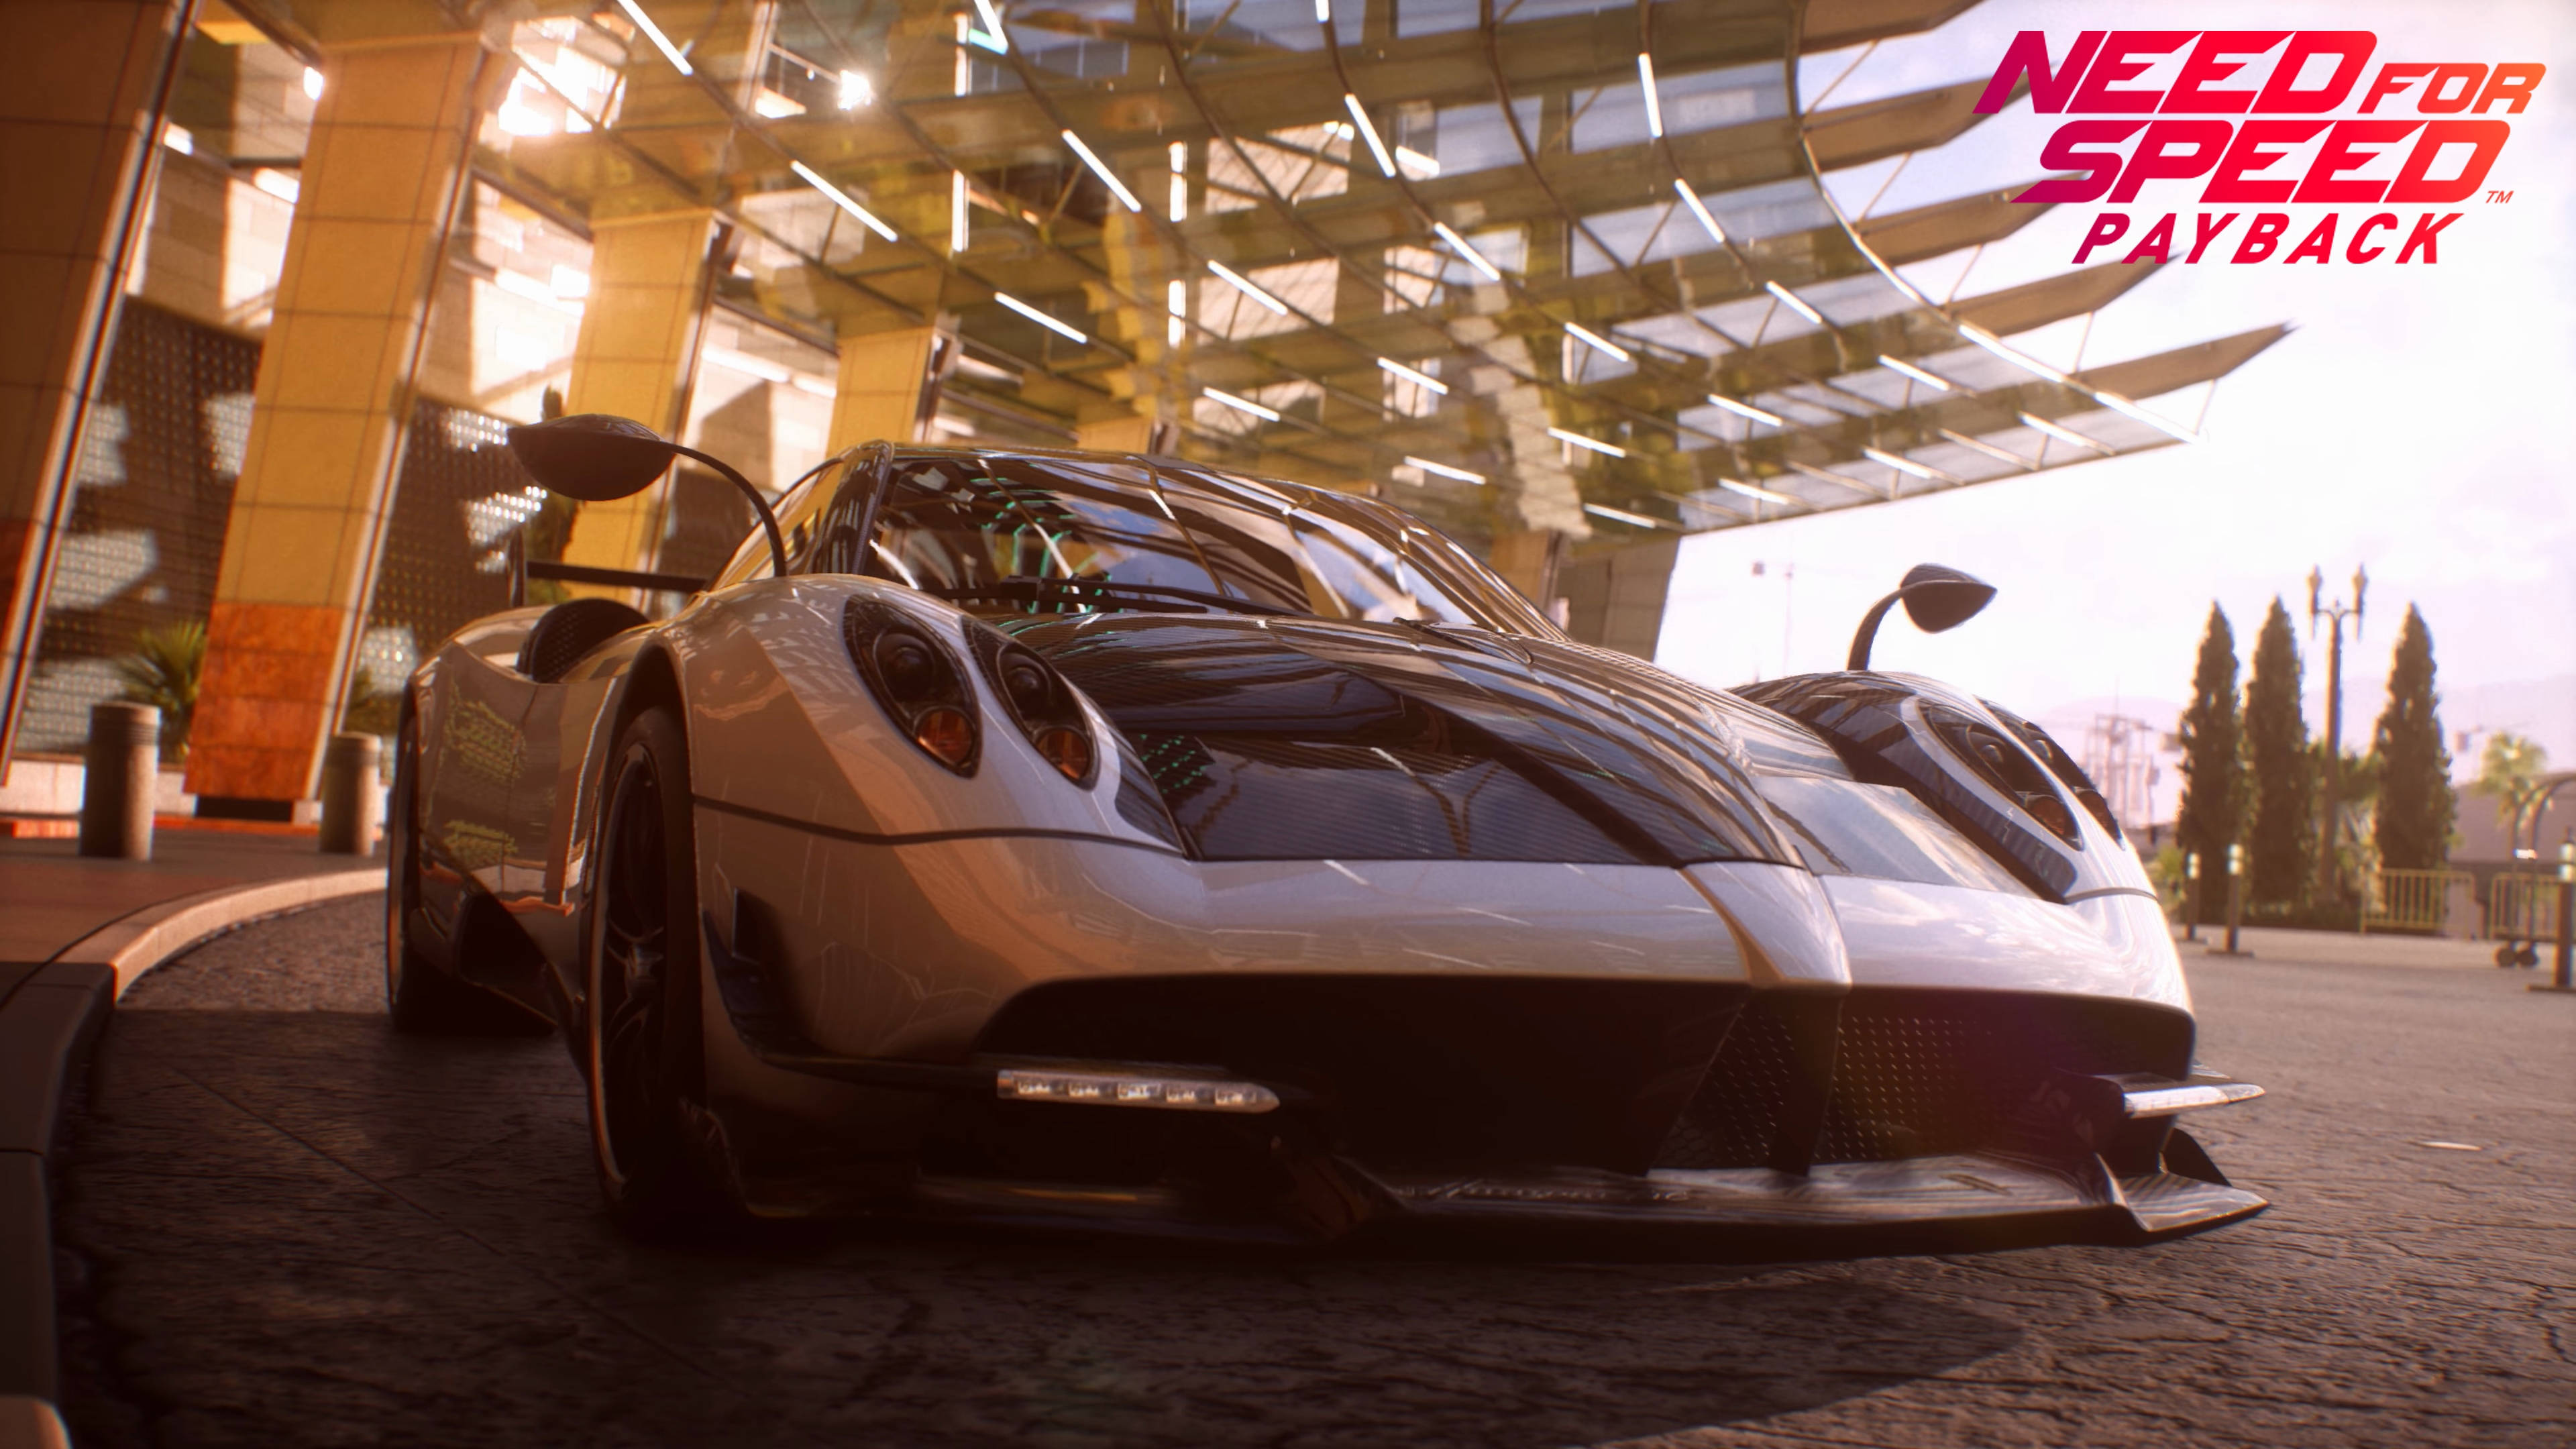 Need for speed 2017. Need for Speed: Payback. Pagani Huayra NFS. Пагани NFS Payback. Нфс 2017 Payback.